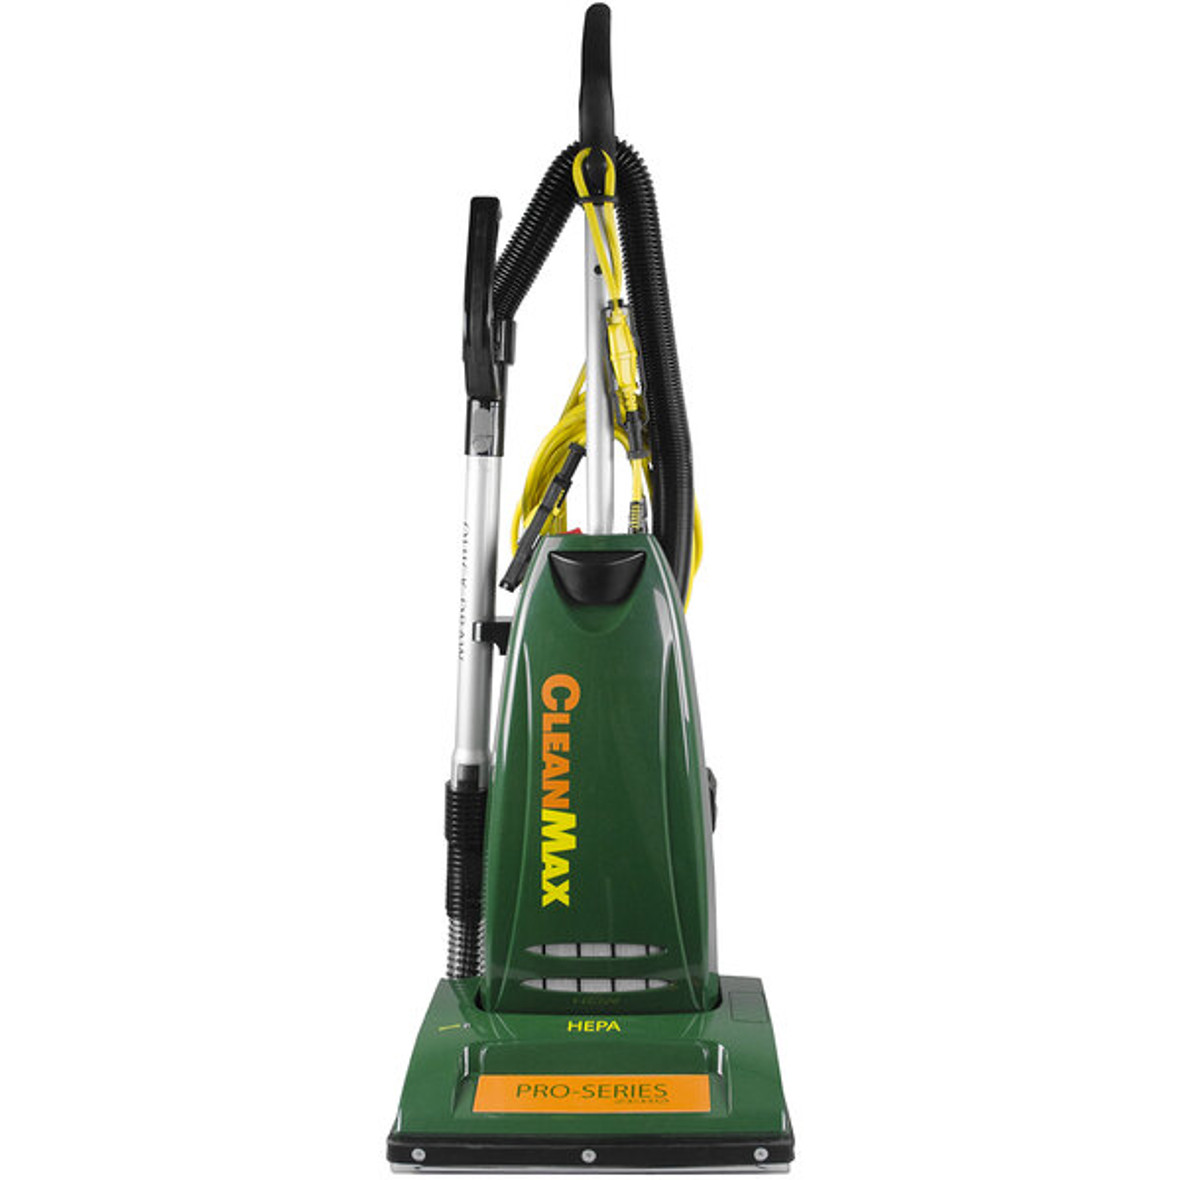 CleanMax Pro Series CMPS-QDZ.2 14" Upright Vacuum Cleaner with Quickdraw Tools and Lifetime Belt